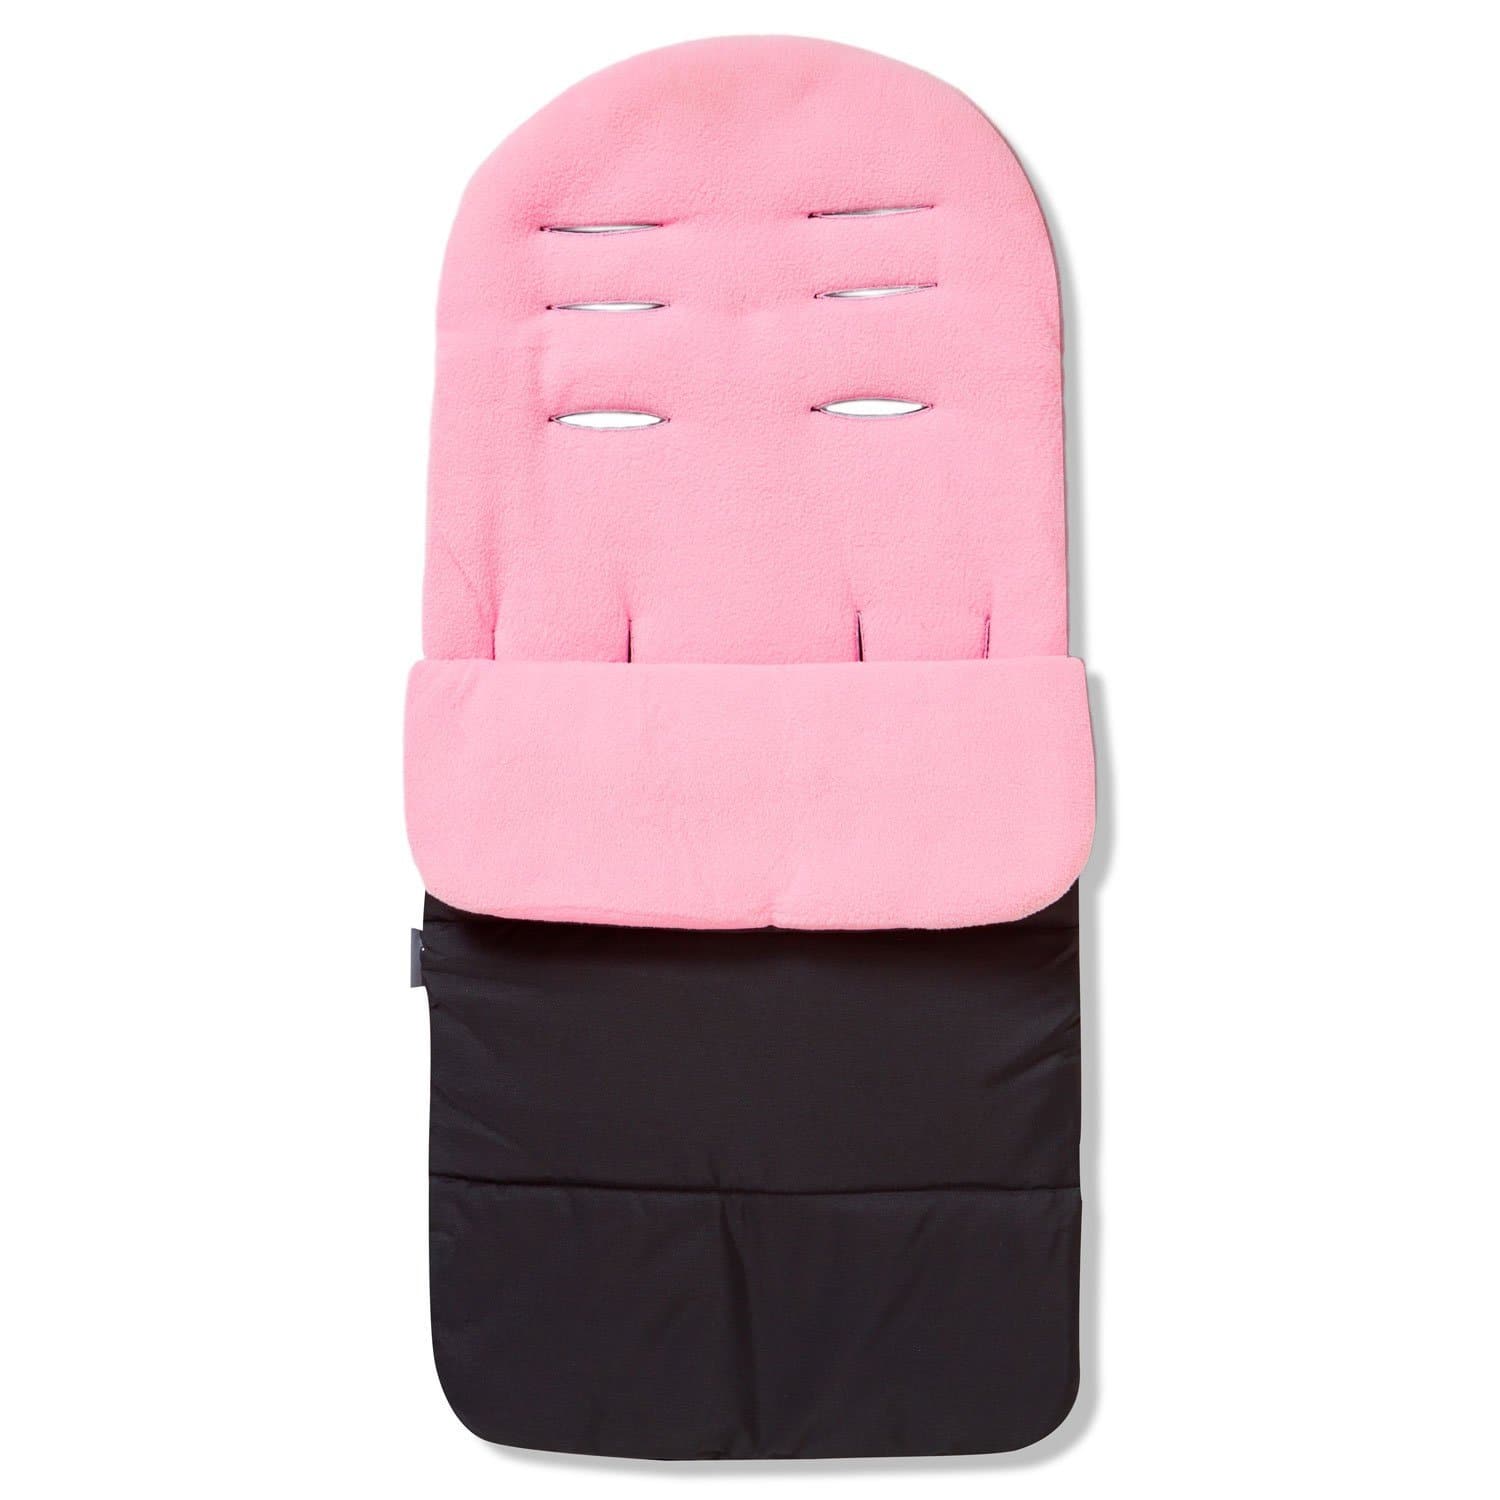 Premium Footmuff / Cosy Toes Compatible with Bebe 9 - Candy Pink / Fits All Models | For Your Little One